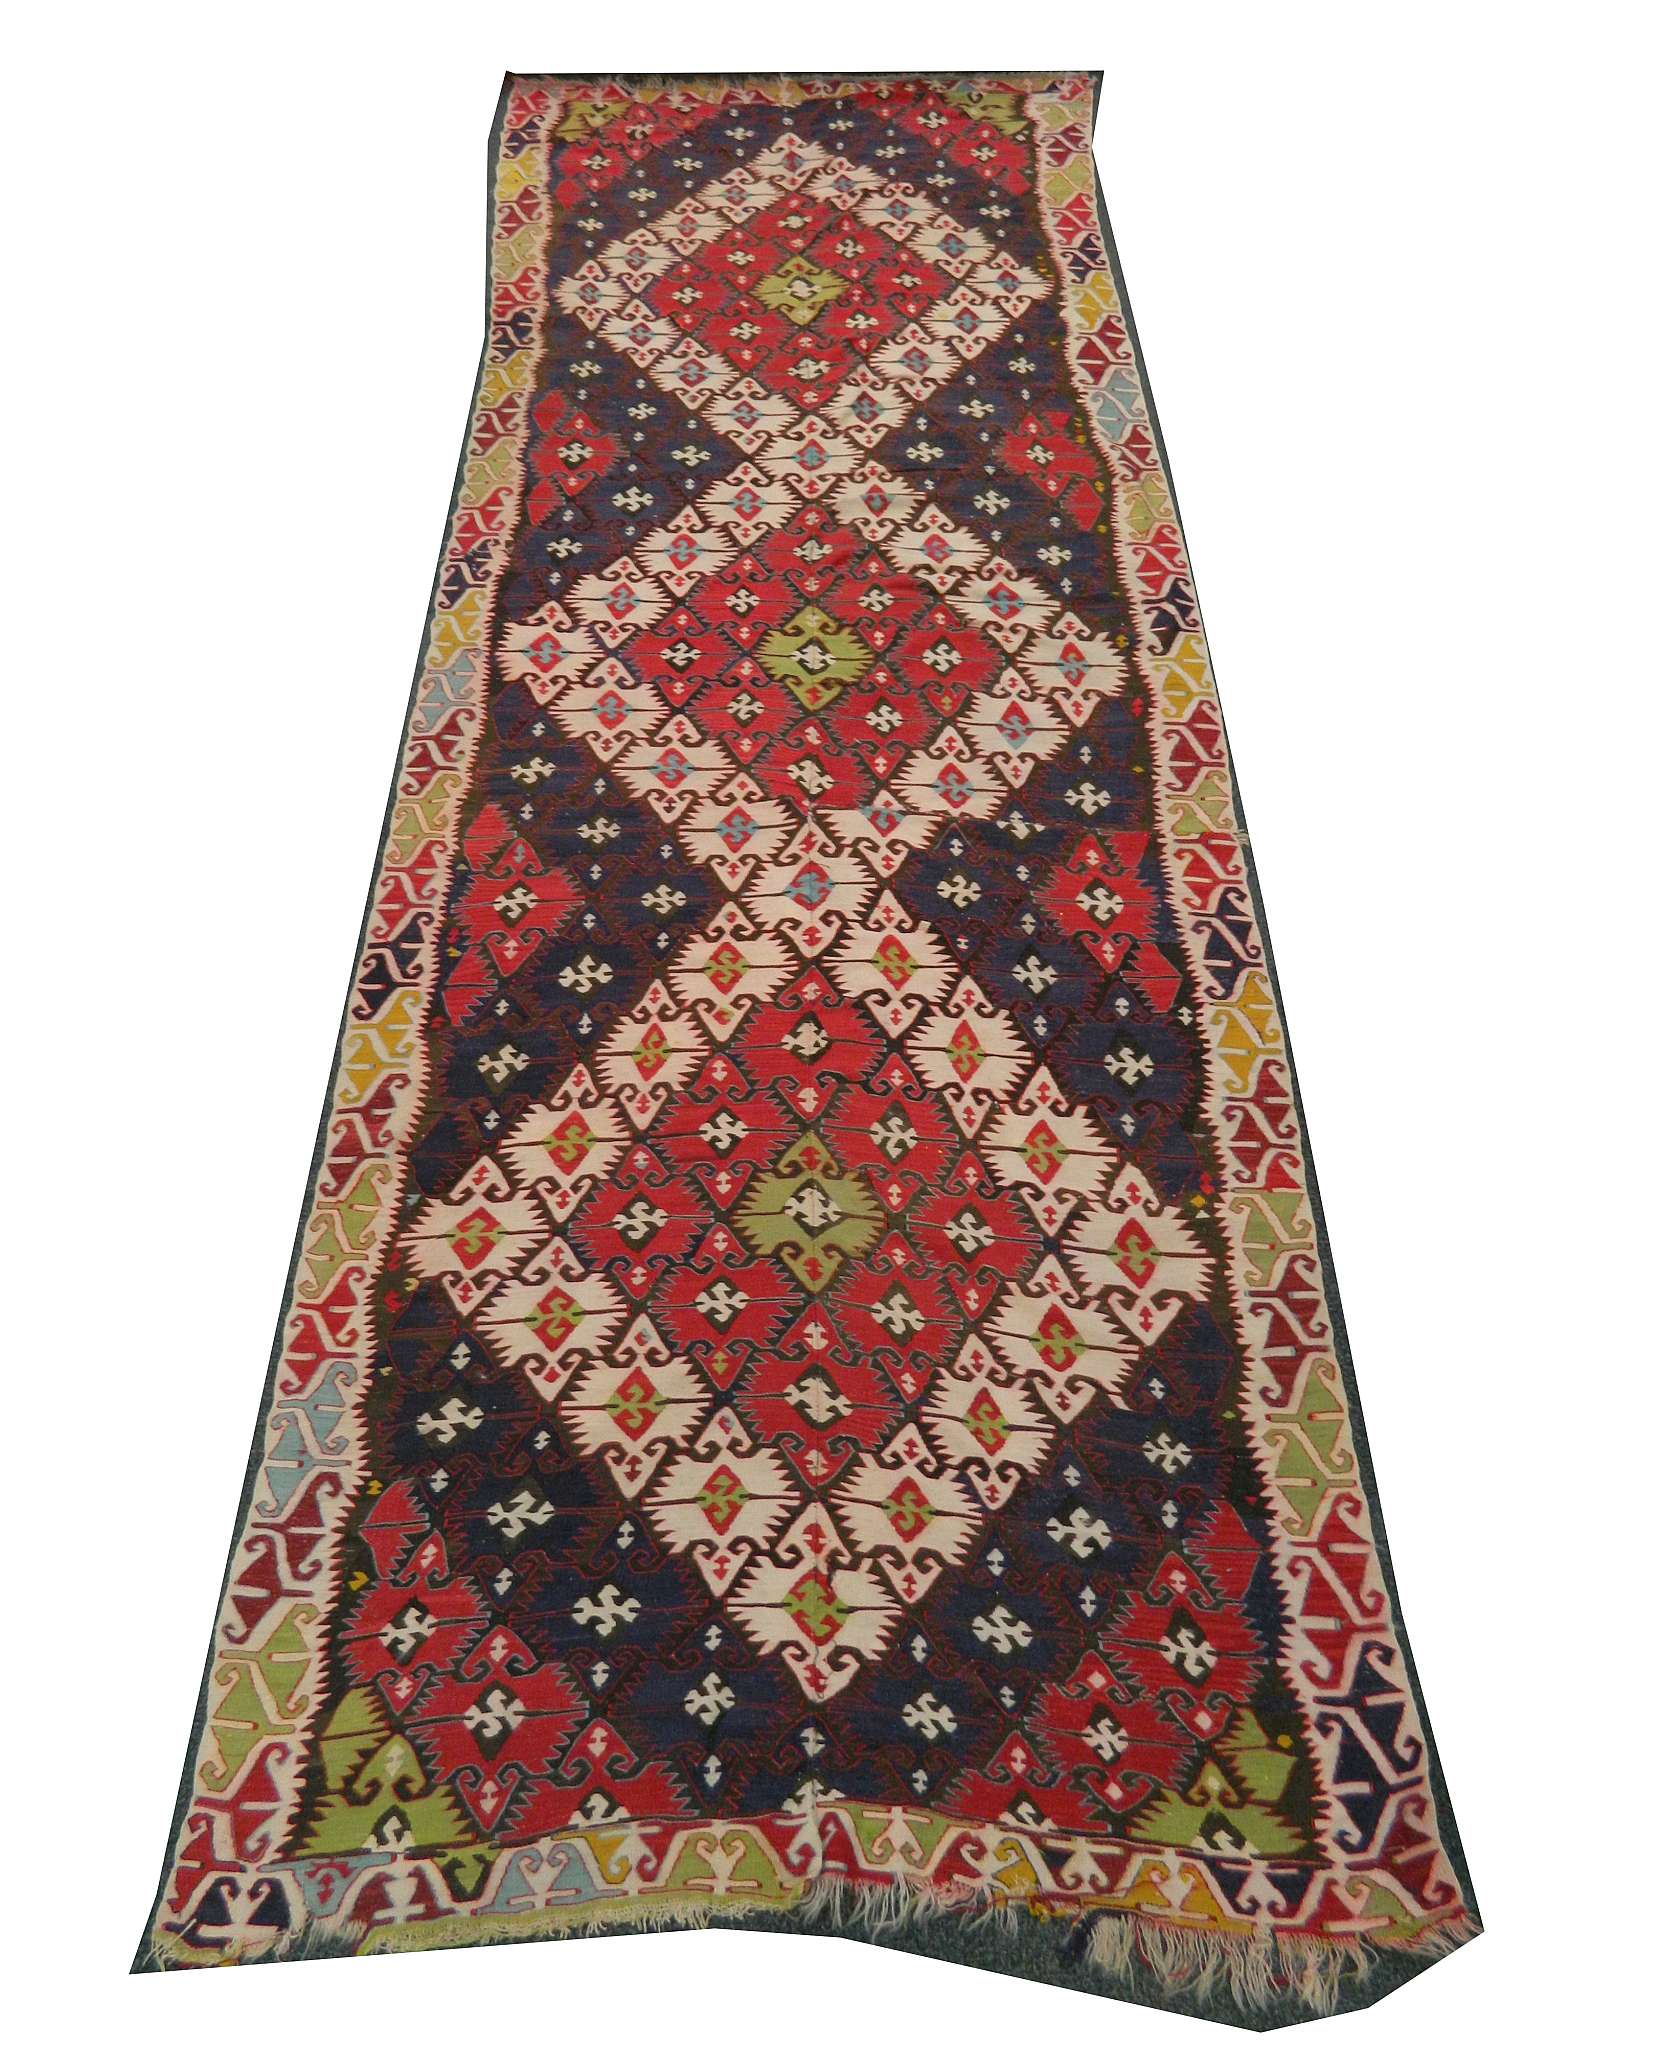 An early to mid 20th Century Anatolian kilim, 4.54m x 1.58m. Condition rating C.